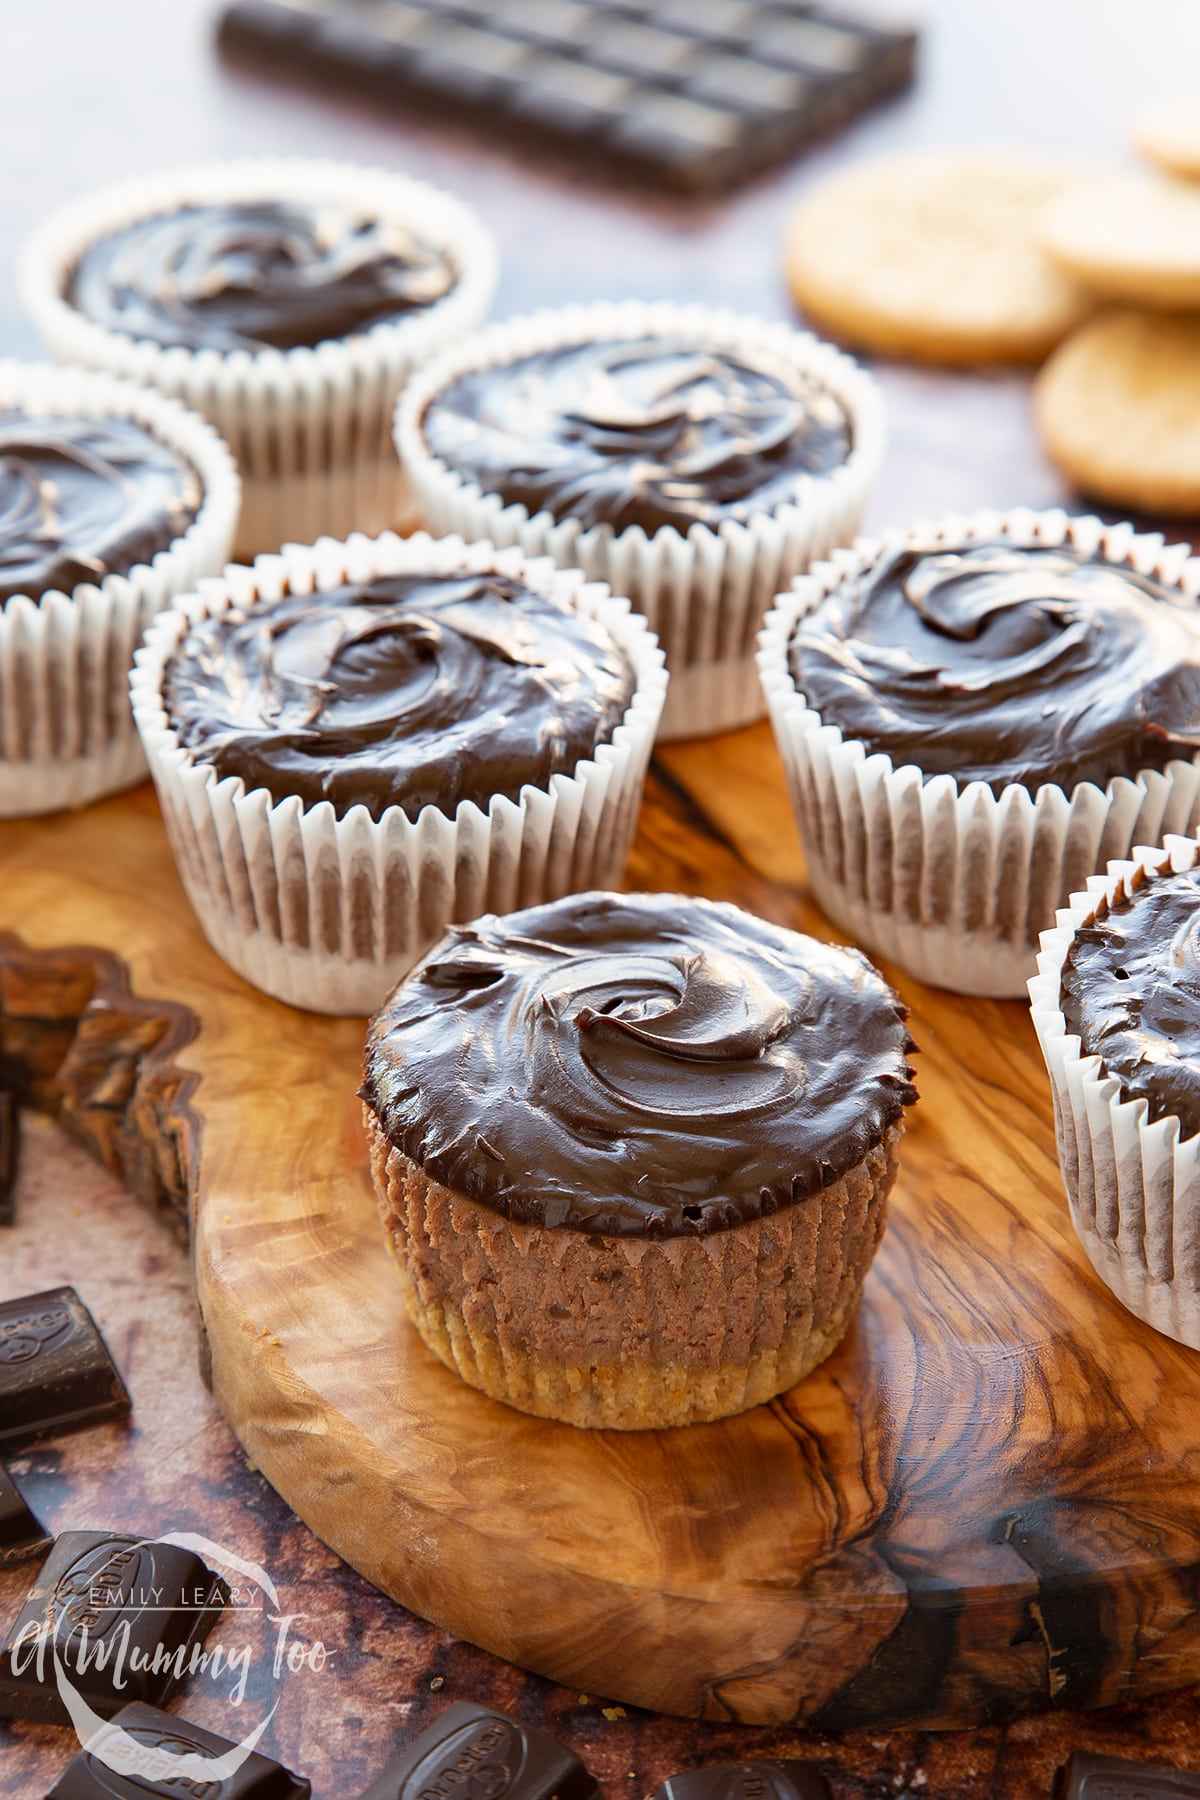 Chocolate cheesecake cupcakes in rows on an olive wood board. The one in the foreground has been unwrapped.